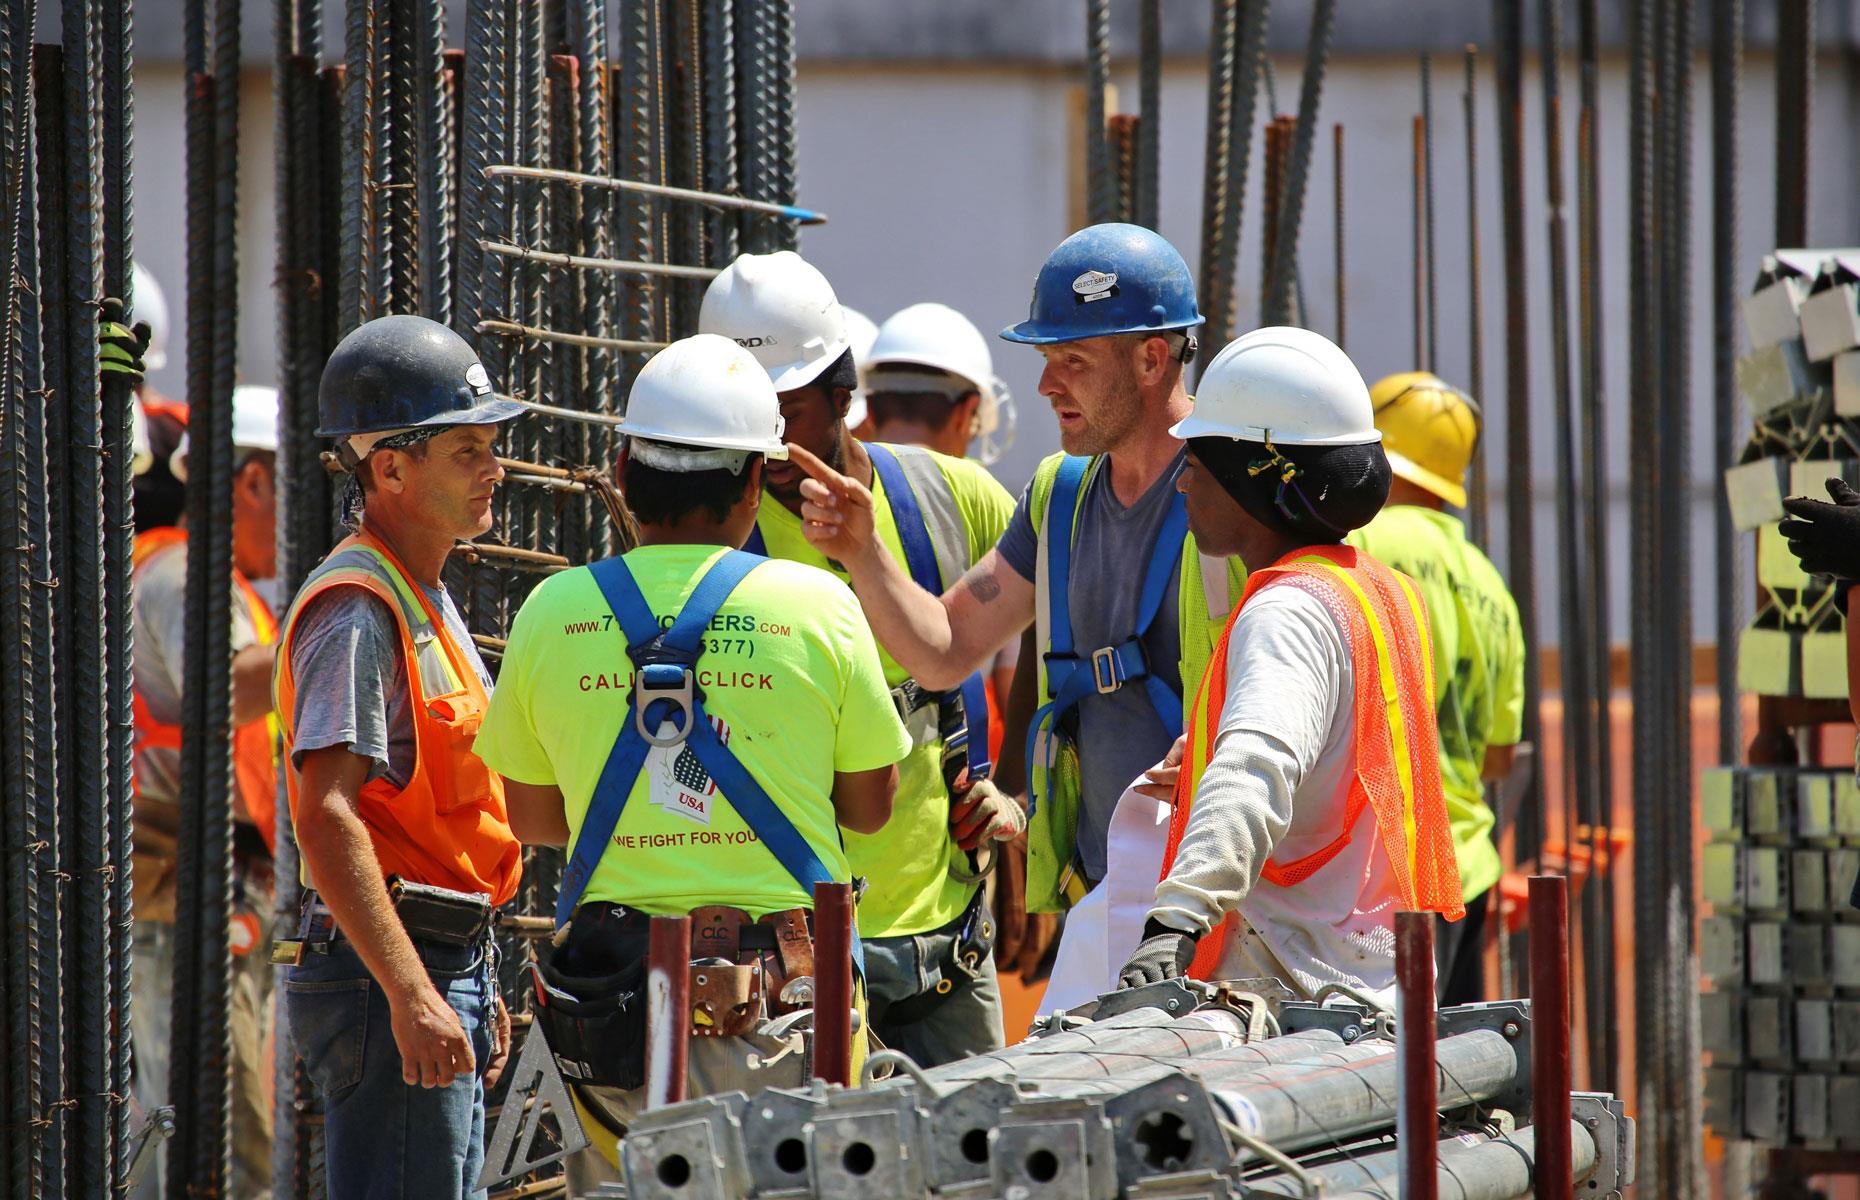 Highest-paying country for construction workers: USA – $69,300 (£53k) average salary